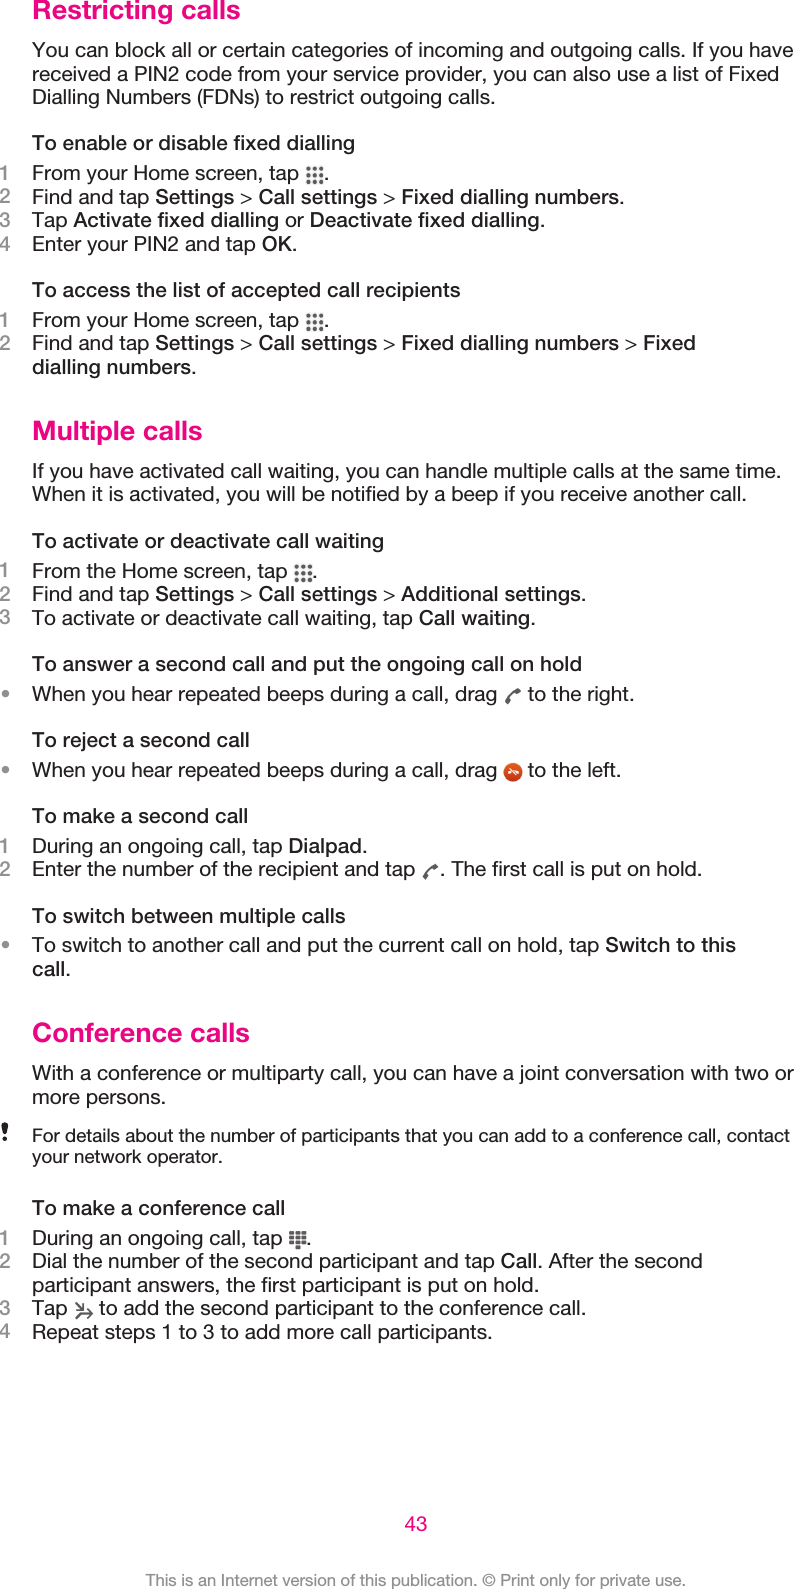 Restricting callsYou can block all or certain categories of incoming and outgoing calls. If you havereceived a PIN2 code from your service provider, you can also use a list of FixedDialling Numbers (FDNs) to restrict outgoing calls.To enable or disable fixed dialling1From your Home screen, tap  .2Find and tap Settings &gt; Call settings &gt; Fixed dialling numbers.3Tap Activate fixed dialling or Deactivate fixed dialling.4Enter your PIN2 and tap OK.To access the list of accepted call recipients1From your Home screen, tap  .2Find and tap Settings &gt; Call settings &gt; Fixed dialling numbers &gt; Fixeddialling numbers.Multiple callsIf you have activated call waiting, you can handle multiple calls at the same time.When it is activated, you will be notified by a beep if you receive another call.To activate or deactivate call waiting1From the Home screen, tap  .2Find and tap Settings &gt; Call settings &gt; Additional settings.3To activate or deactivate call waiting, tap Call waiting.To answer a second call and put the ongoing call on hold•When you hear repeated beeps during a call, drag   to the right.To reject a second call•When you hear repeated beeps during a call, drag   to the left.To make a second call1During an ongoing call, tap Dialpad.2Enter the number of the recipient and tap  . The first call is put on hold.To switch between multiple calls•To switch to another call and put the current call on hold, tap Switch to thiscall.Conference callsWith a conference or multiparty call, you can have a joint conversation with two ormore persons.For details about the number of participants that you can add to a conference call, contactyour network operator.To make a conference call1During an ongoing call, tap  .2Dial the number of the second participant and tap Call. After the secondparticipant answers, the first participant is put on hold.3Tap   to add the second participant to the conference call.4Repeat steps 1 to 3 to add more call participants.43This is an Internet version of this publication. © Print only for private use.